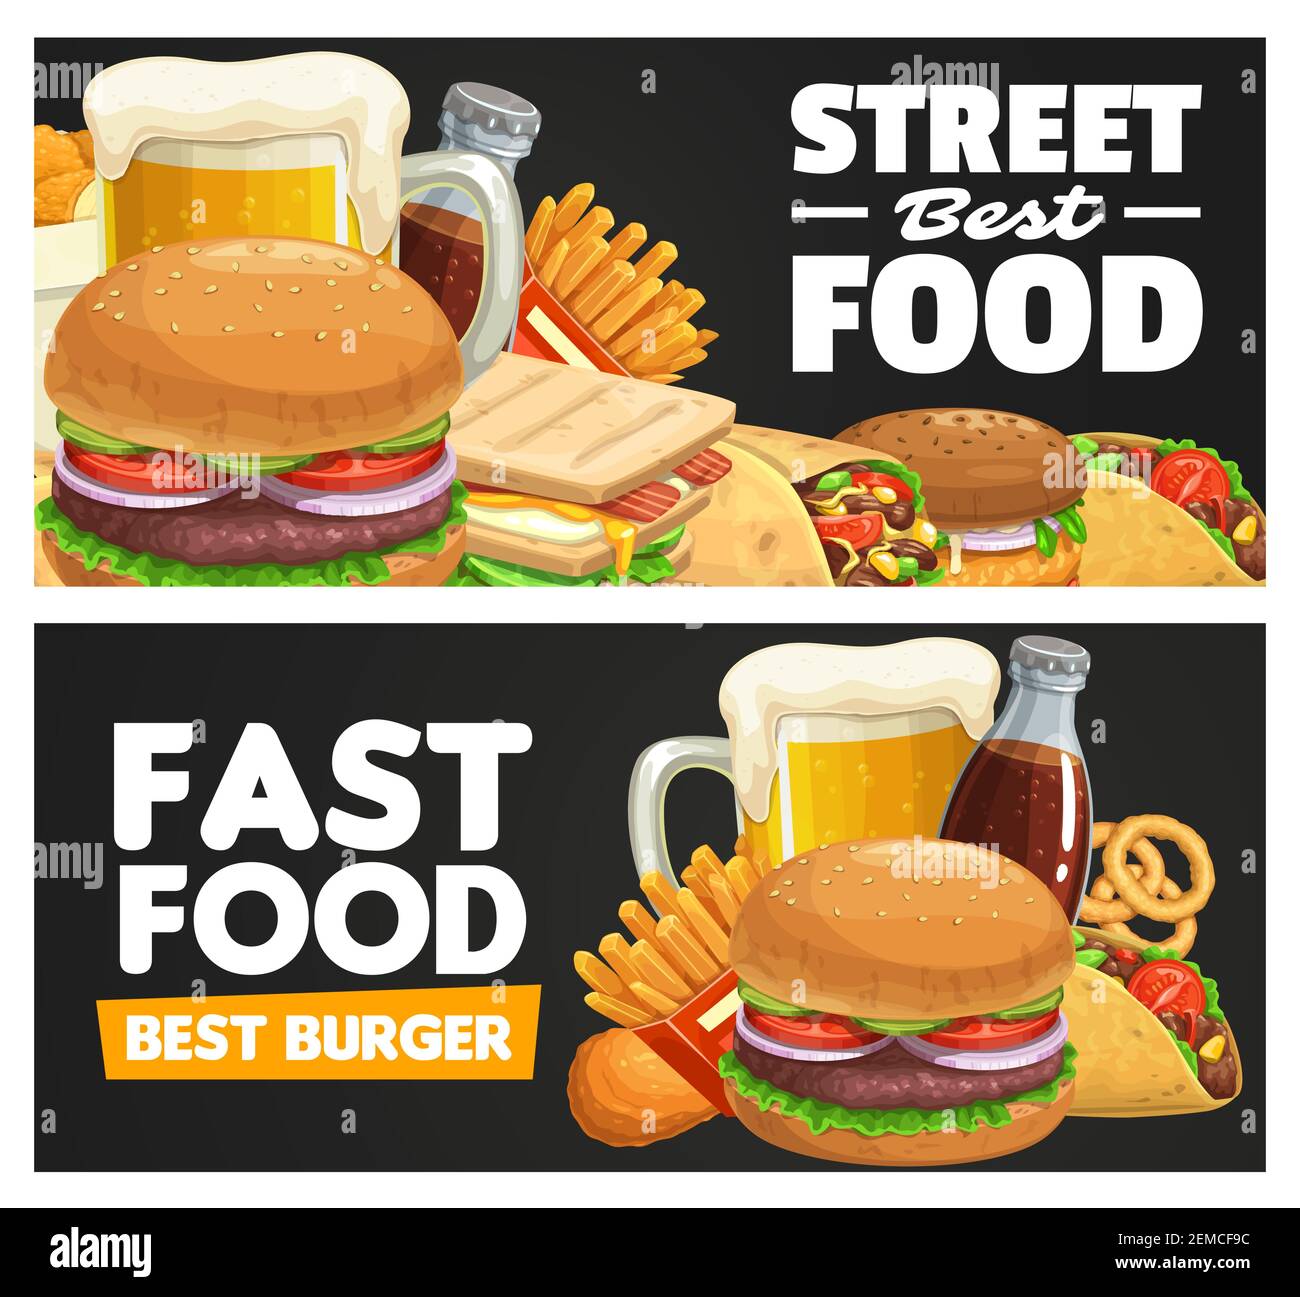 Fast food meals and snacks vector banner. Beer tankard, beef and turkey hamburger, sandwich, burrito and tacos, french fries, fried chicken legs and o Stock Vector